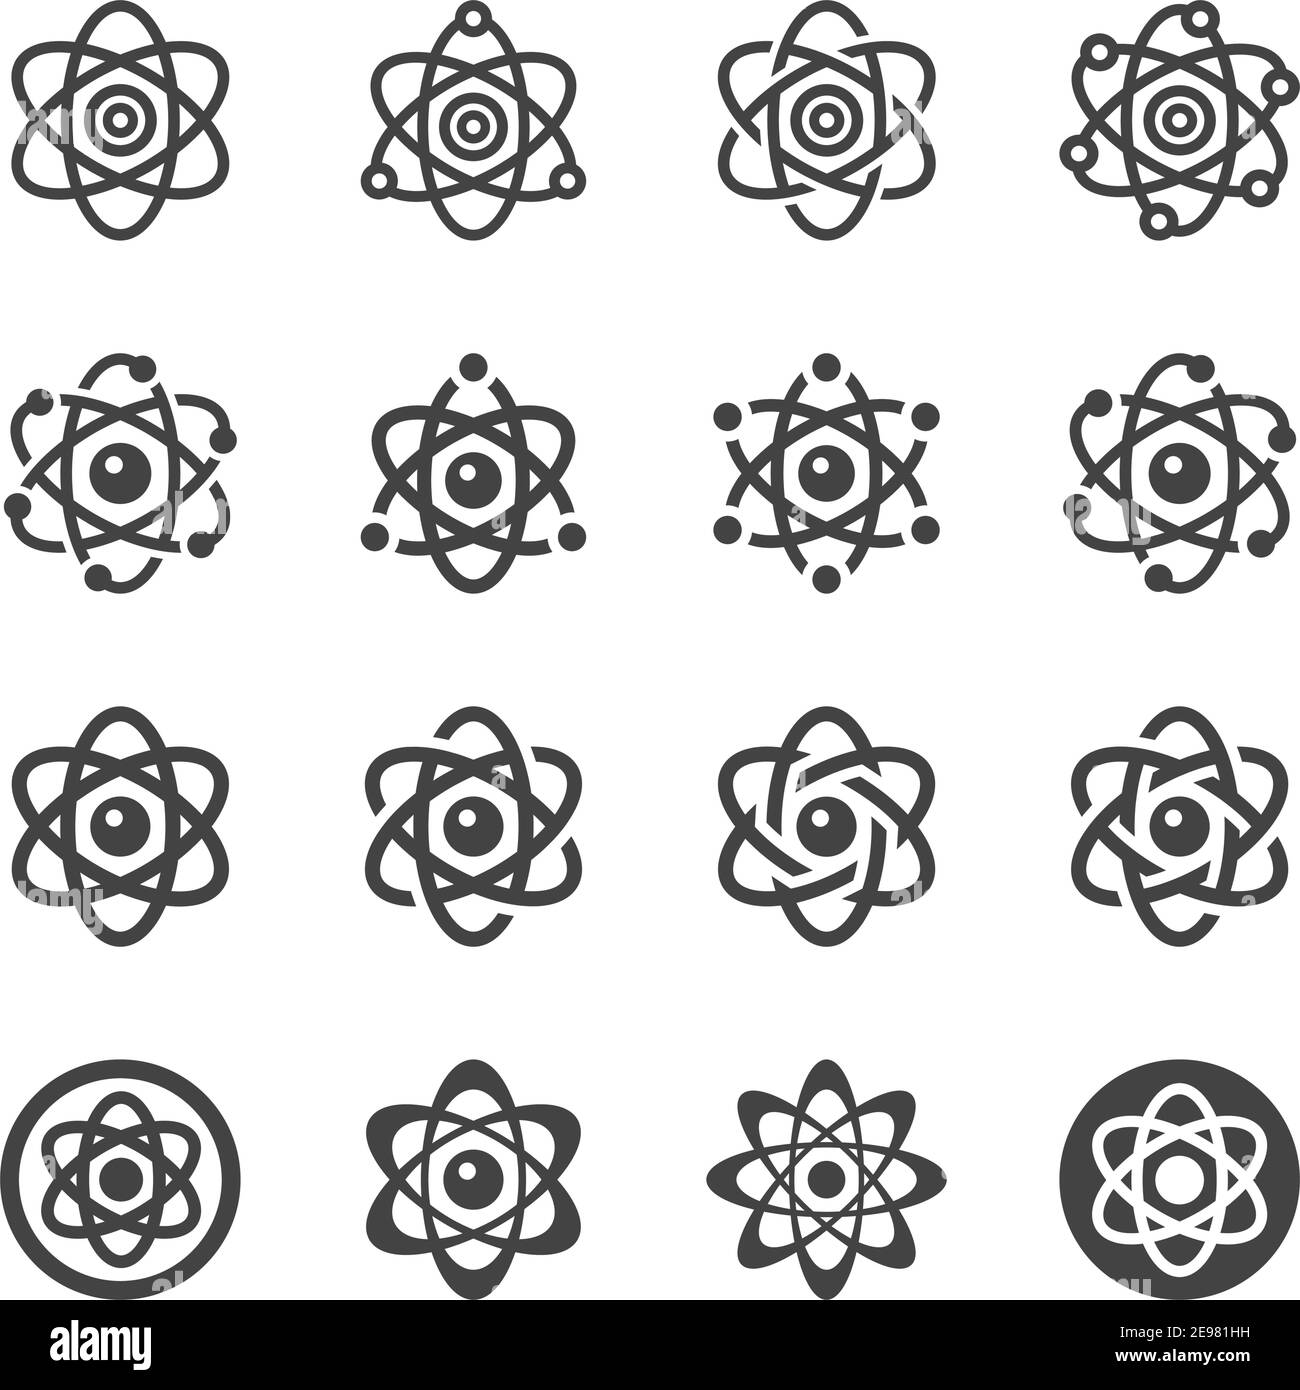 atom icon set,vector and illustration Stock Vector